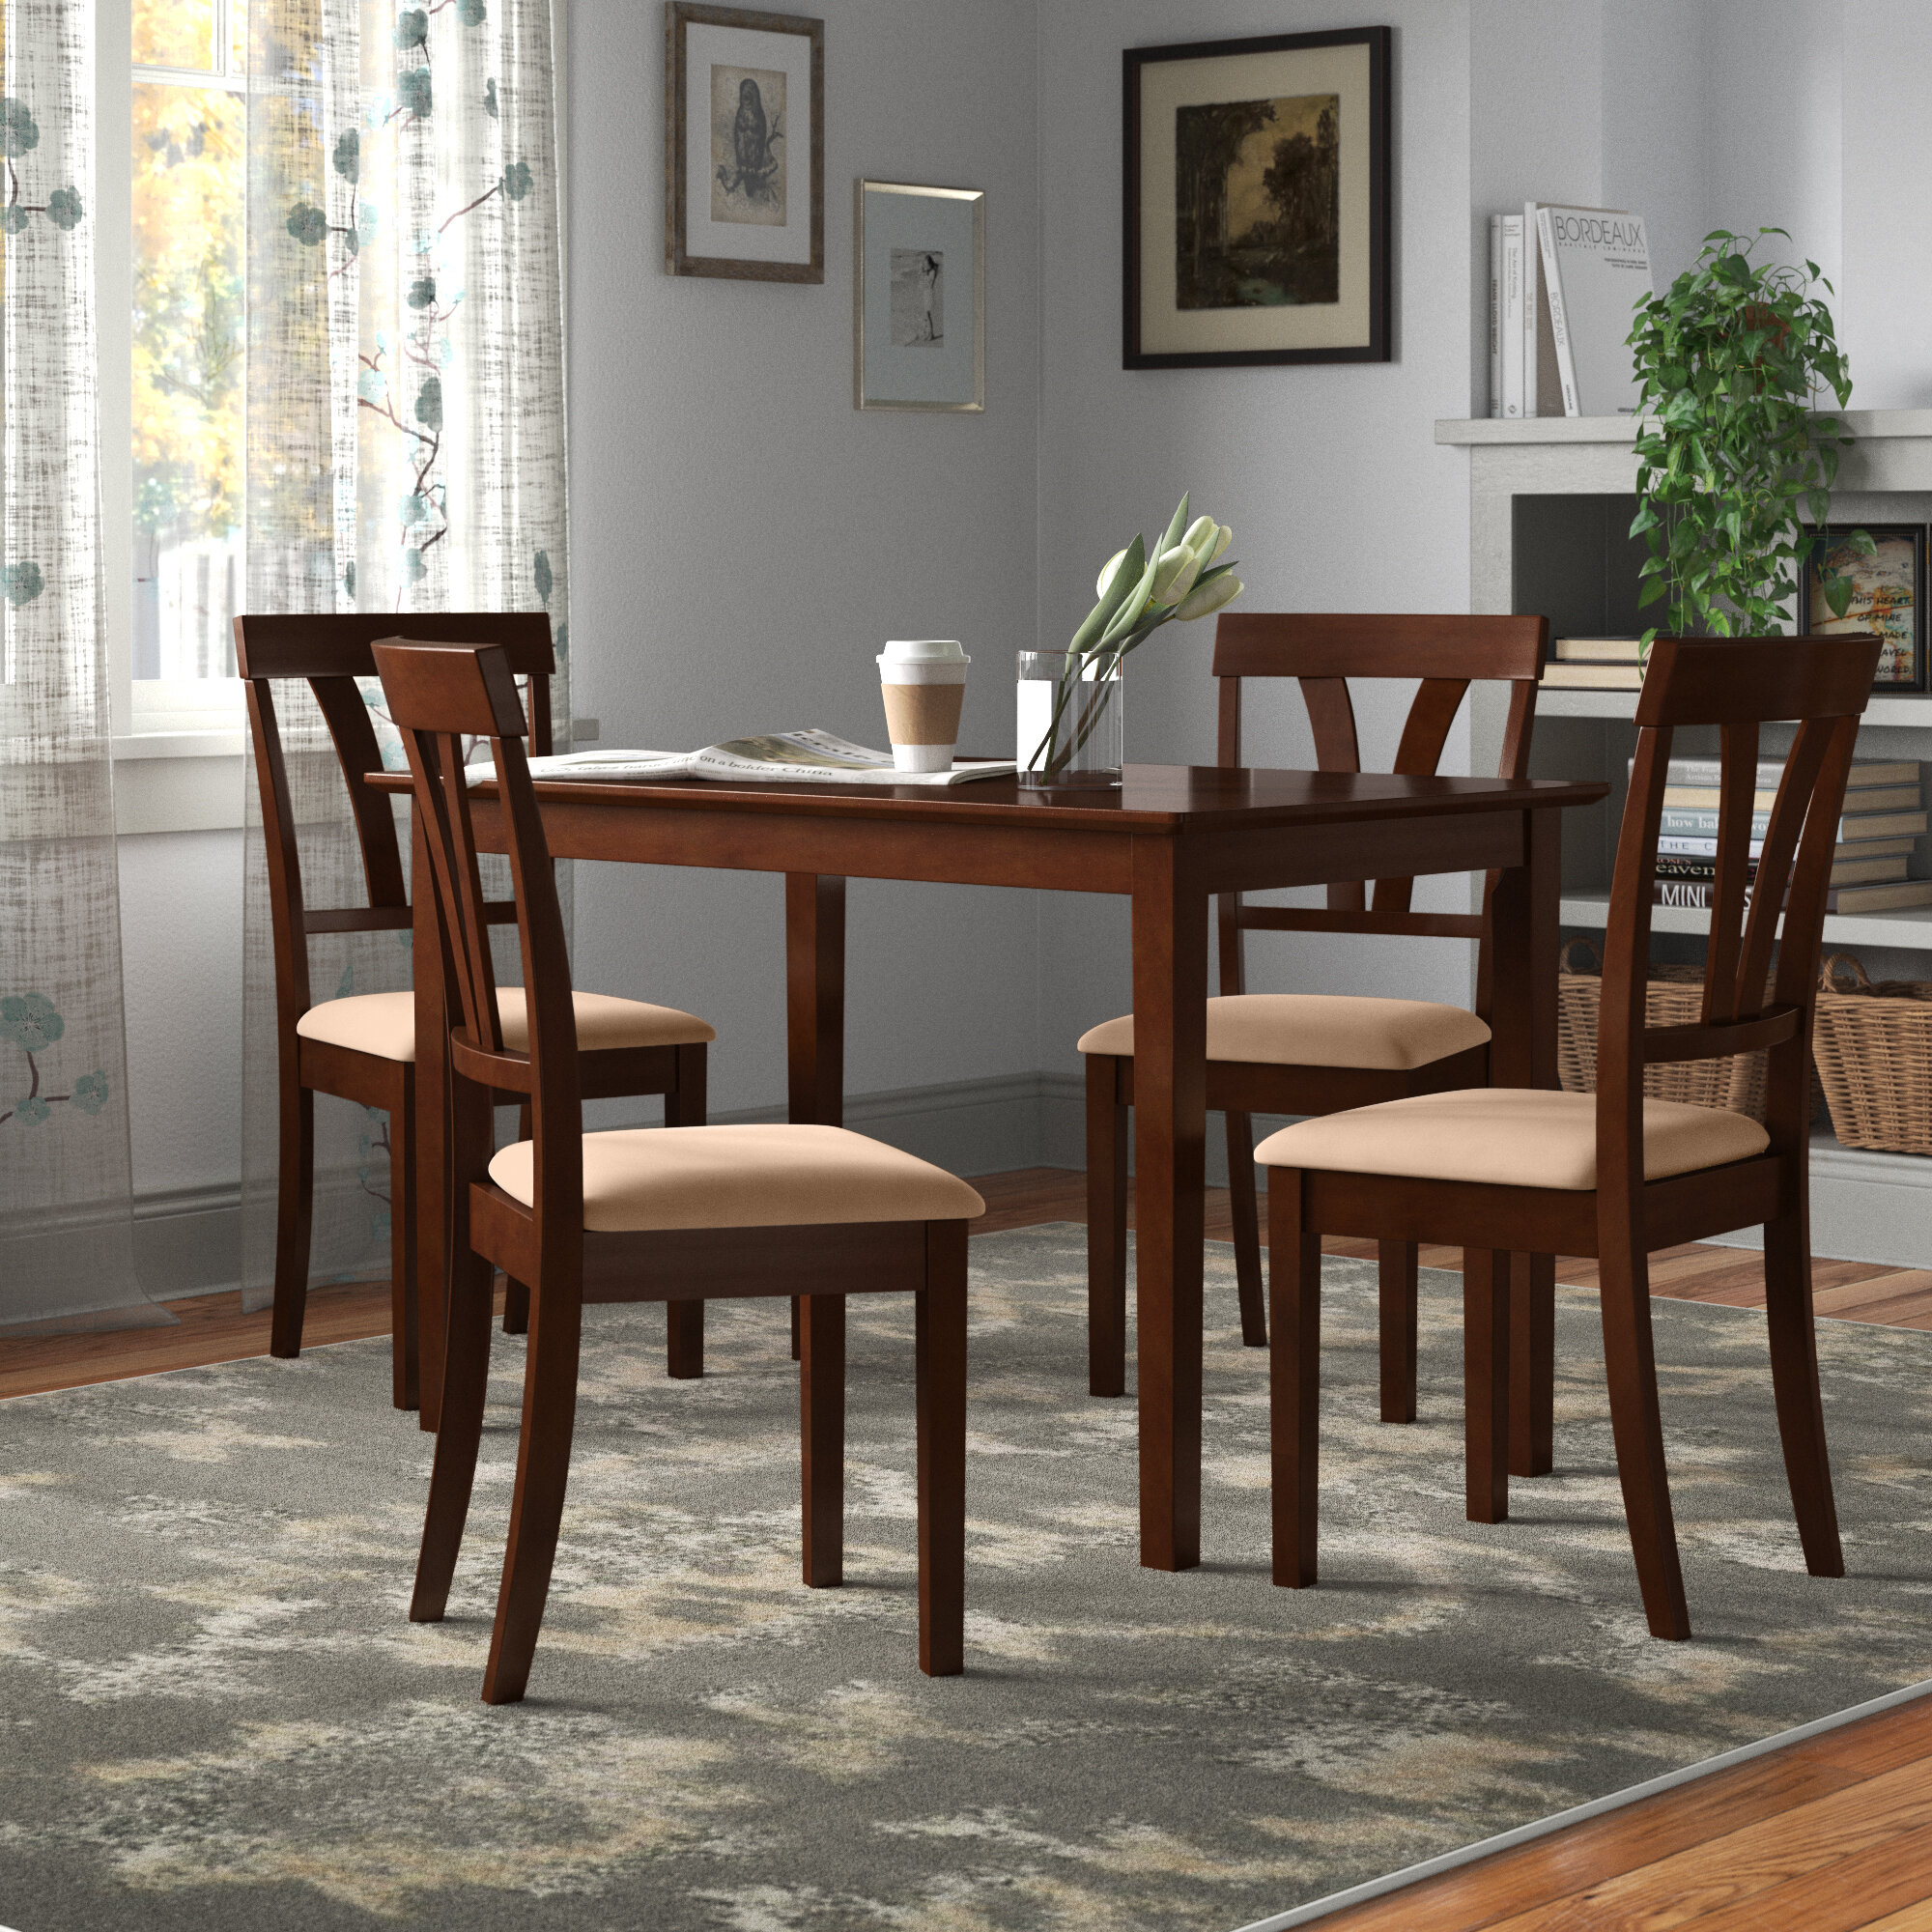 Wayfair | Seats 4 Kitchen & Dining Room Sets You'll Love in 2022